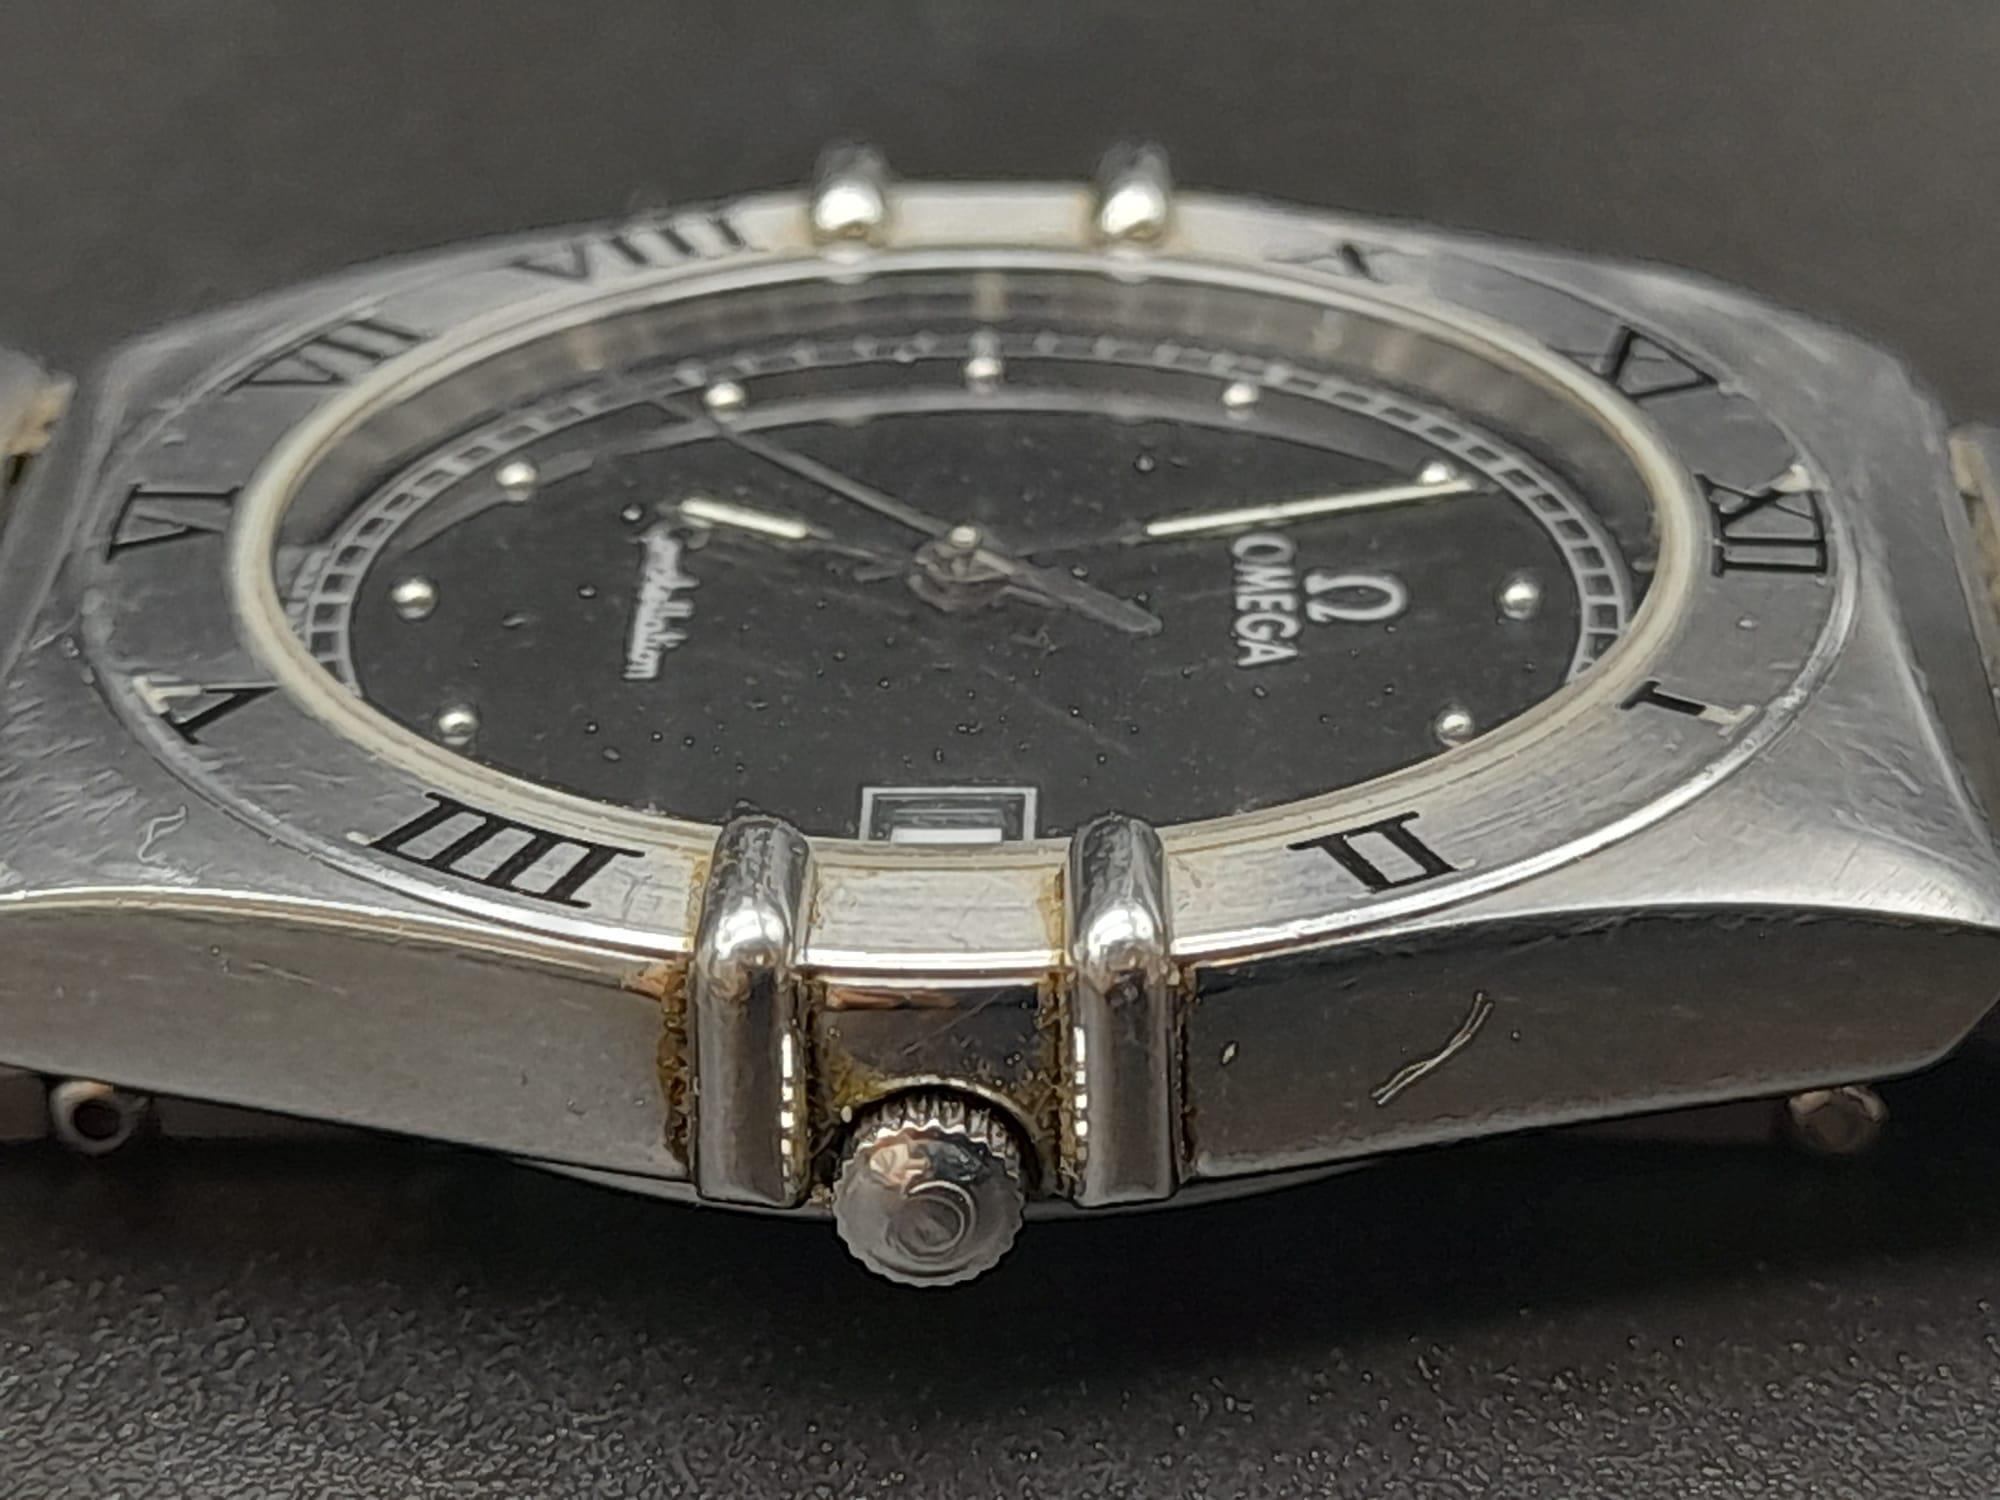 OMEGA CONSTELATION QUARTZ BRACELET WATCH WITH ORIGINAL BOX AND PAPERS. 32mm. Needs batteries. - Image 12 of 13